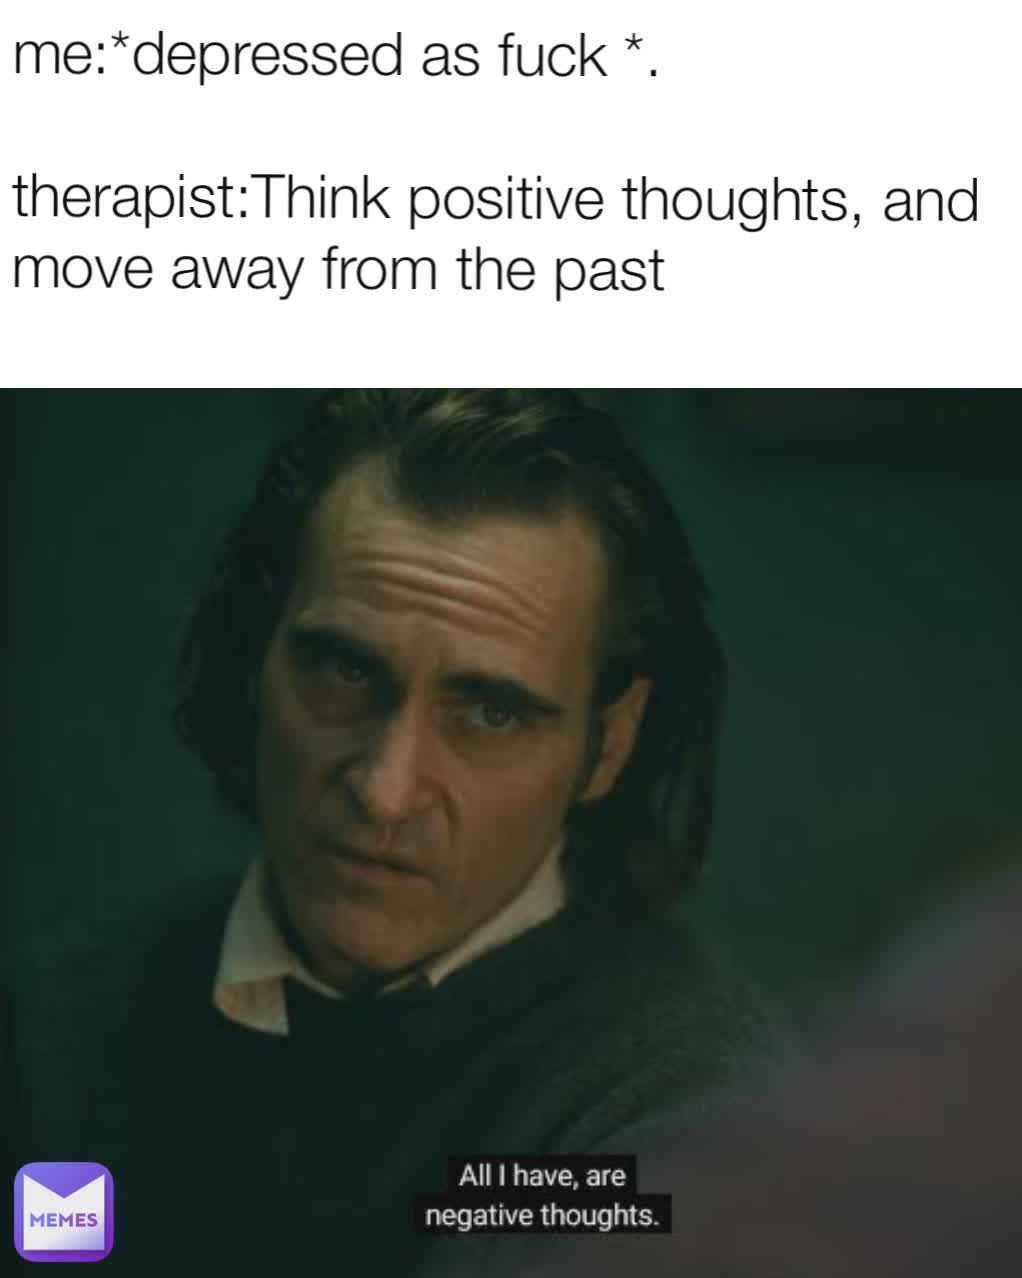 me:*depressed as fuck *.

therapist:Think positive thoughts, and move away from the past